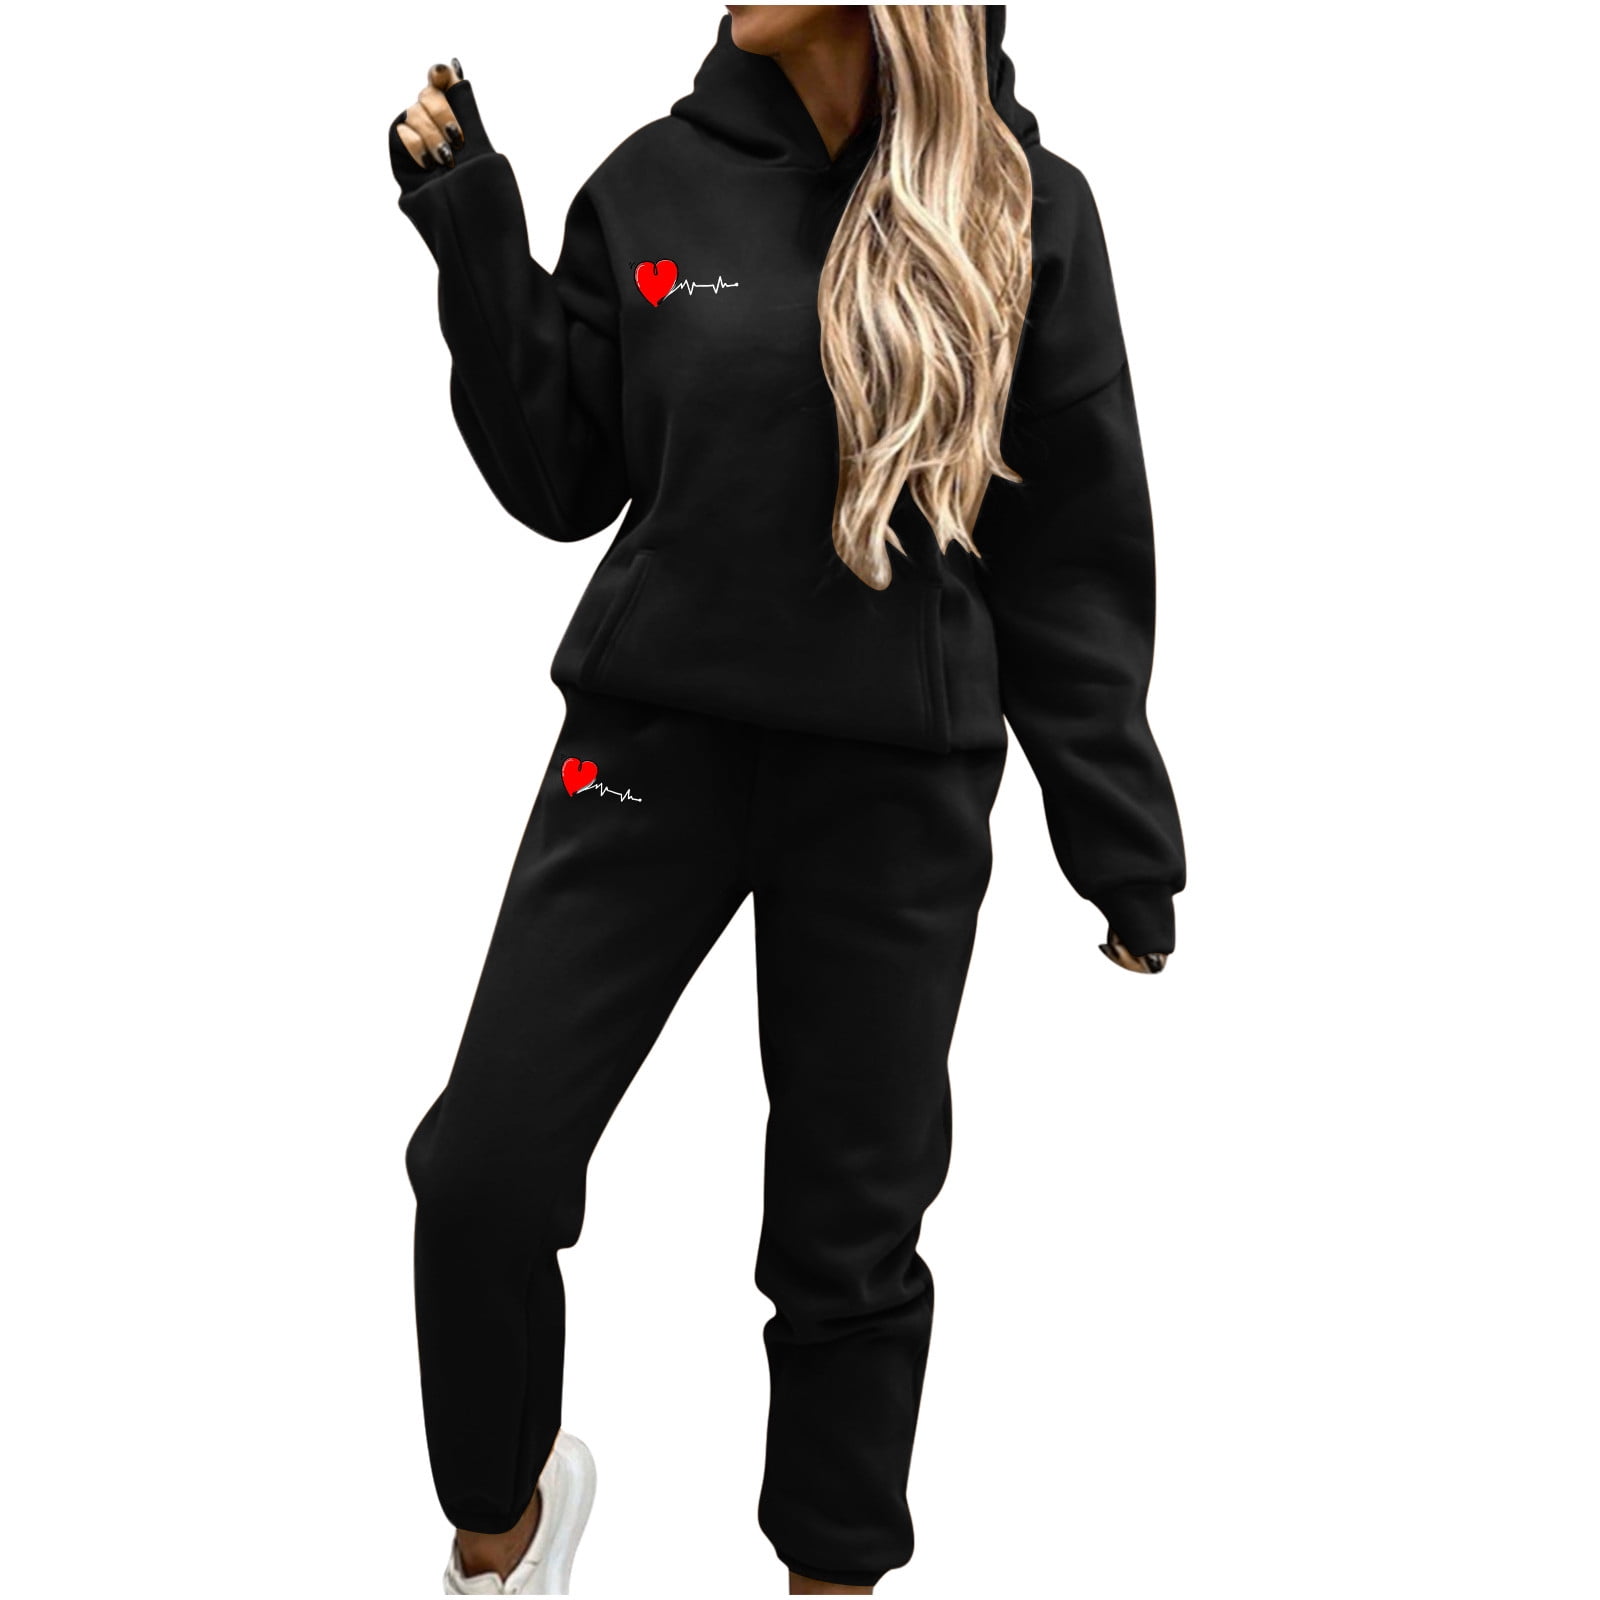 RQYYD Women's Two Piece Outfits Sweatsuit Long Sleeve Hooded Sweatshirt and  Sweatpants Workout Athletic Tracksuits Valentine's Day Loungewear Red L 